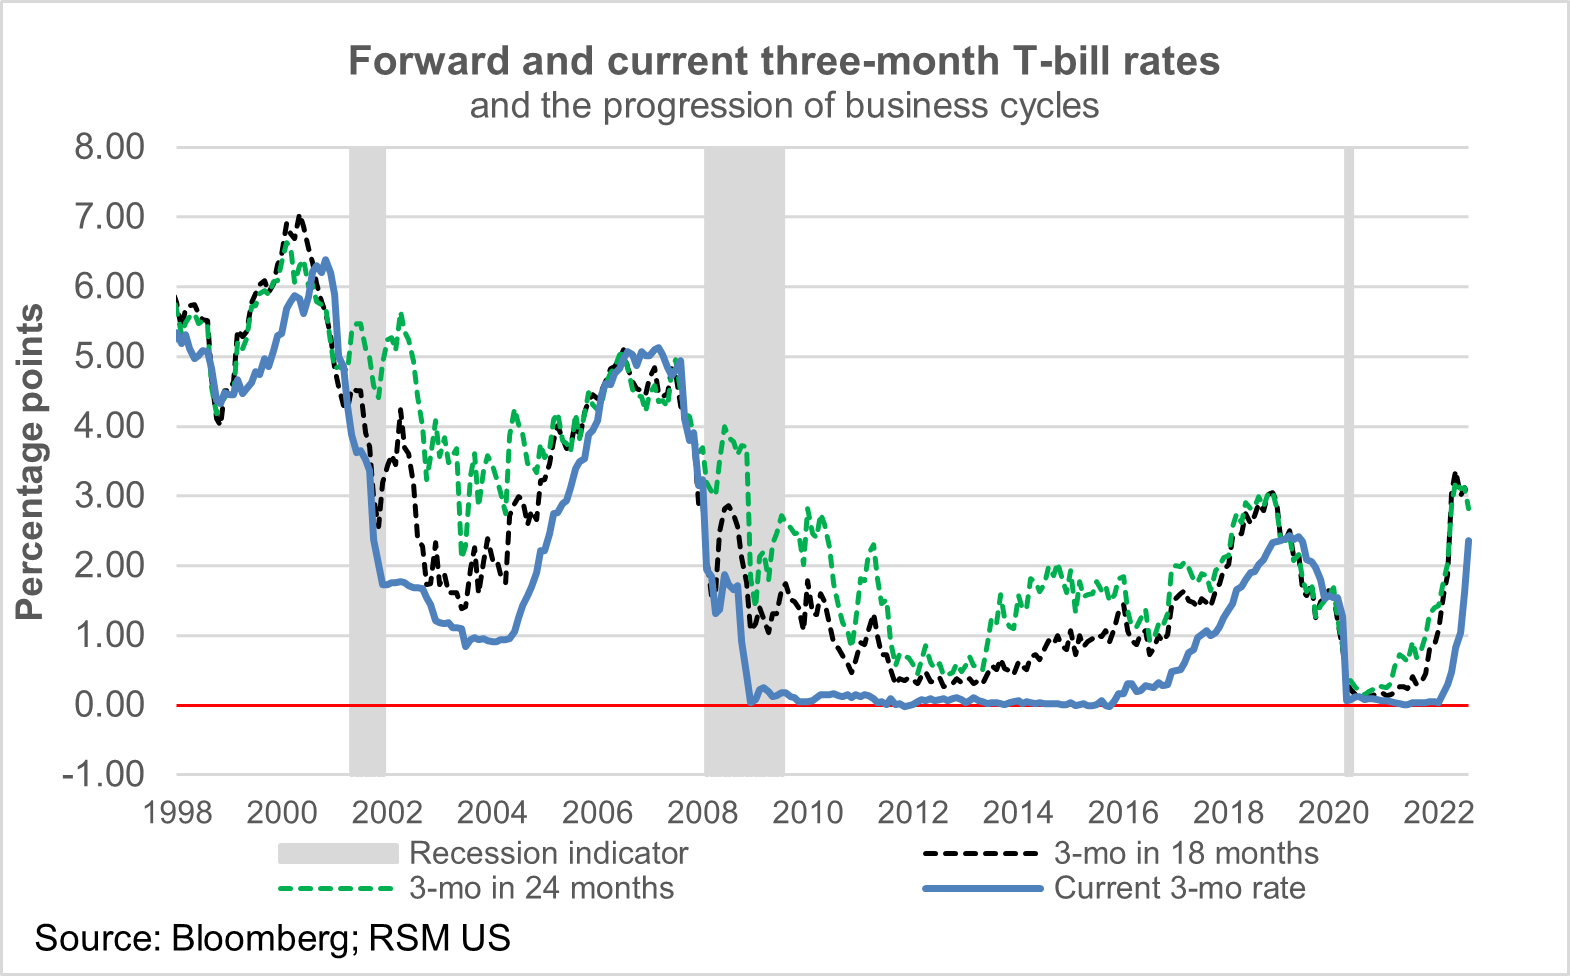 A chart shows forward and current three-month T-bill rates from 1998 to present